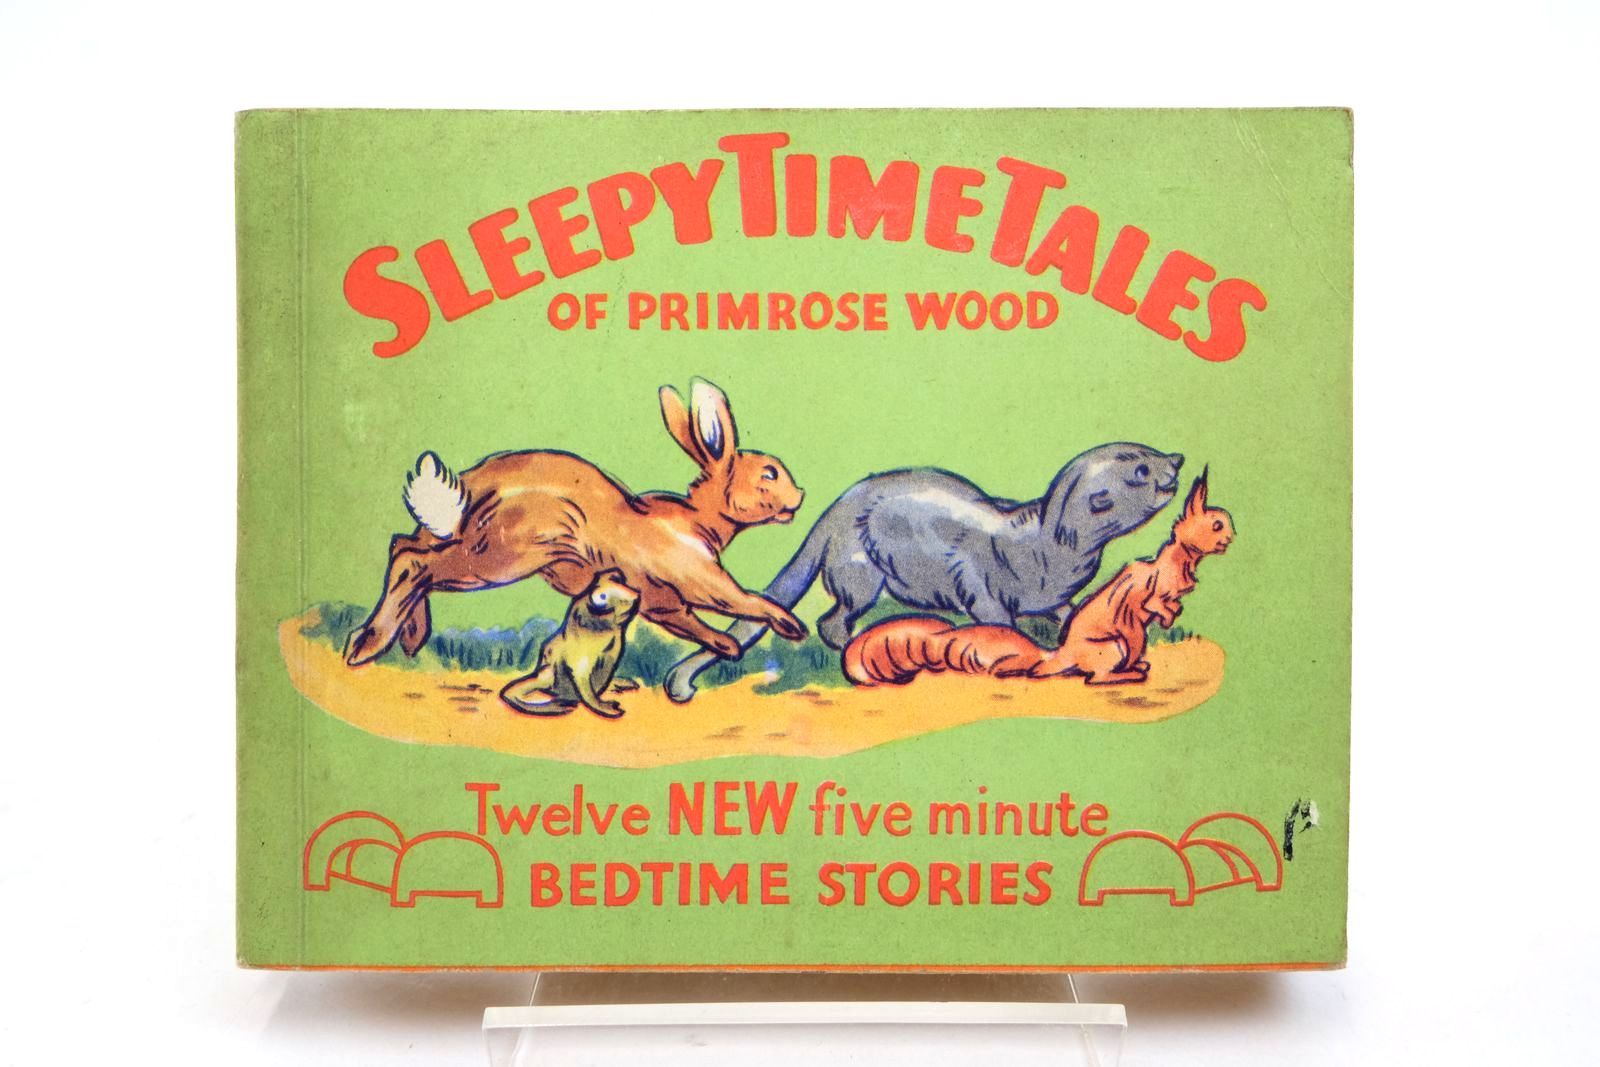 Photo of SLEEPY TIME TALES OF PRIMROSE WOOD written by Hodgetts, Sheila published by Purnell & Sons, Ltd. (STOCK CODE: 2138067)  for sale by Stella & Rose's Books